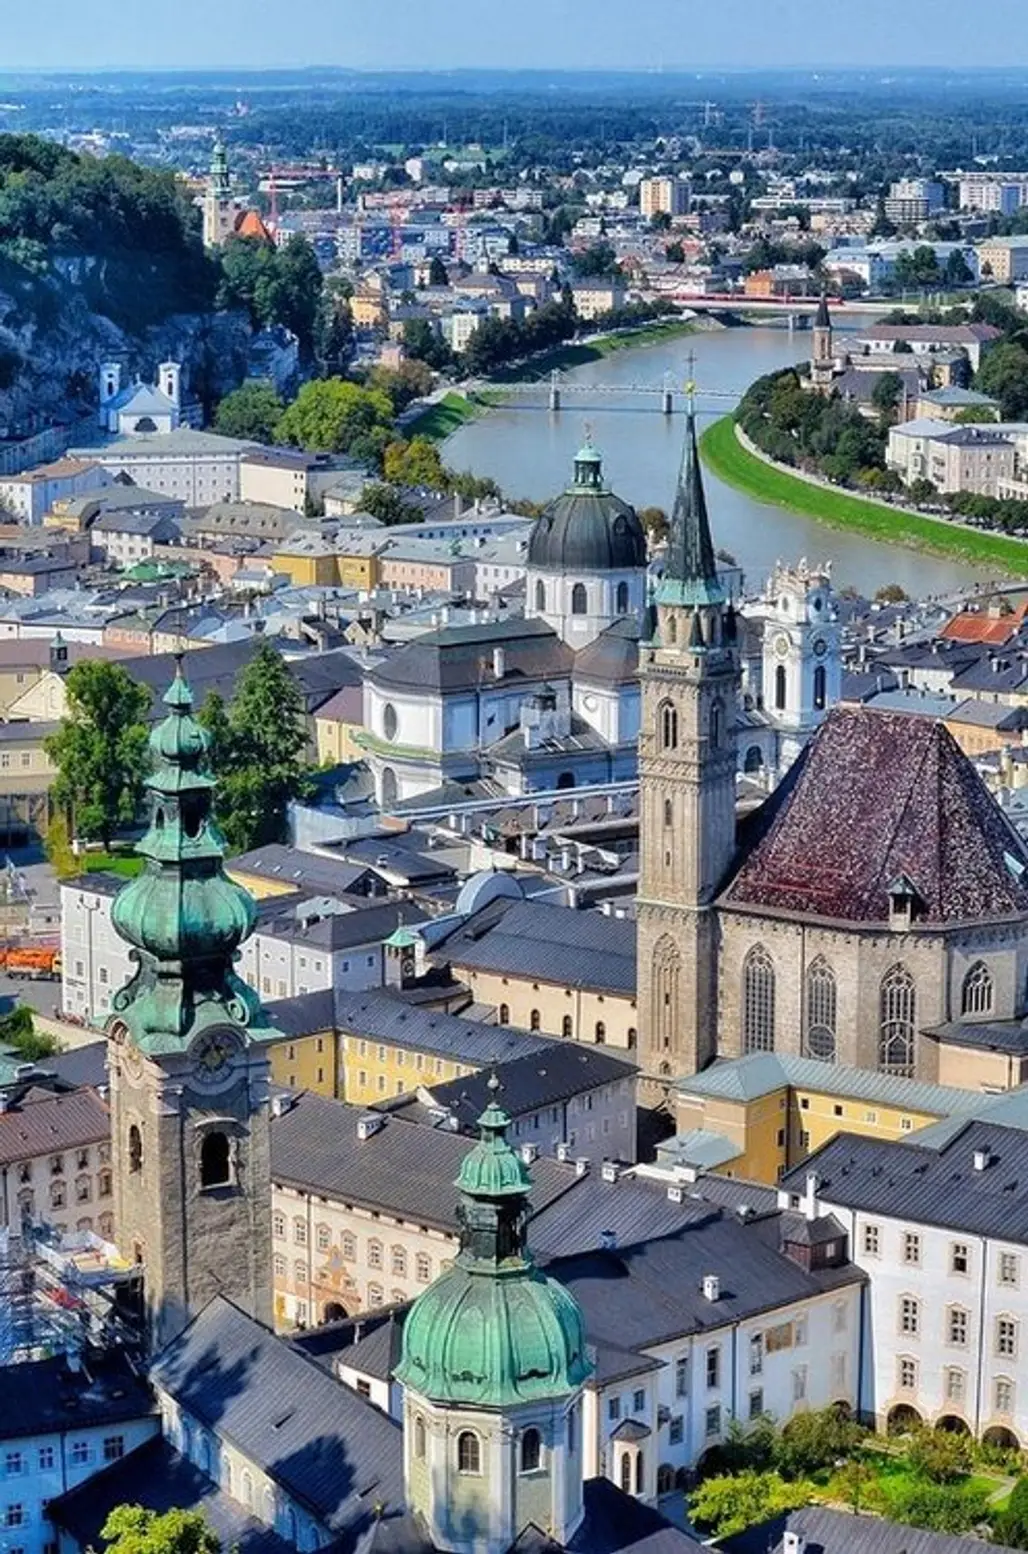 Follow the Sound of Music Trail in Salzburg